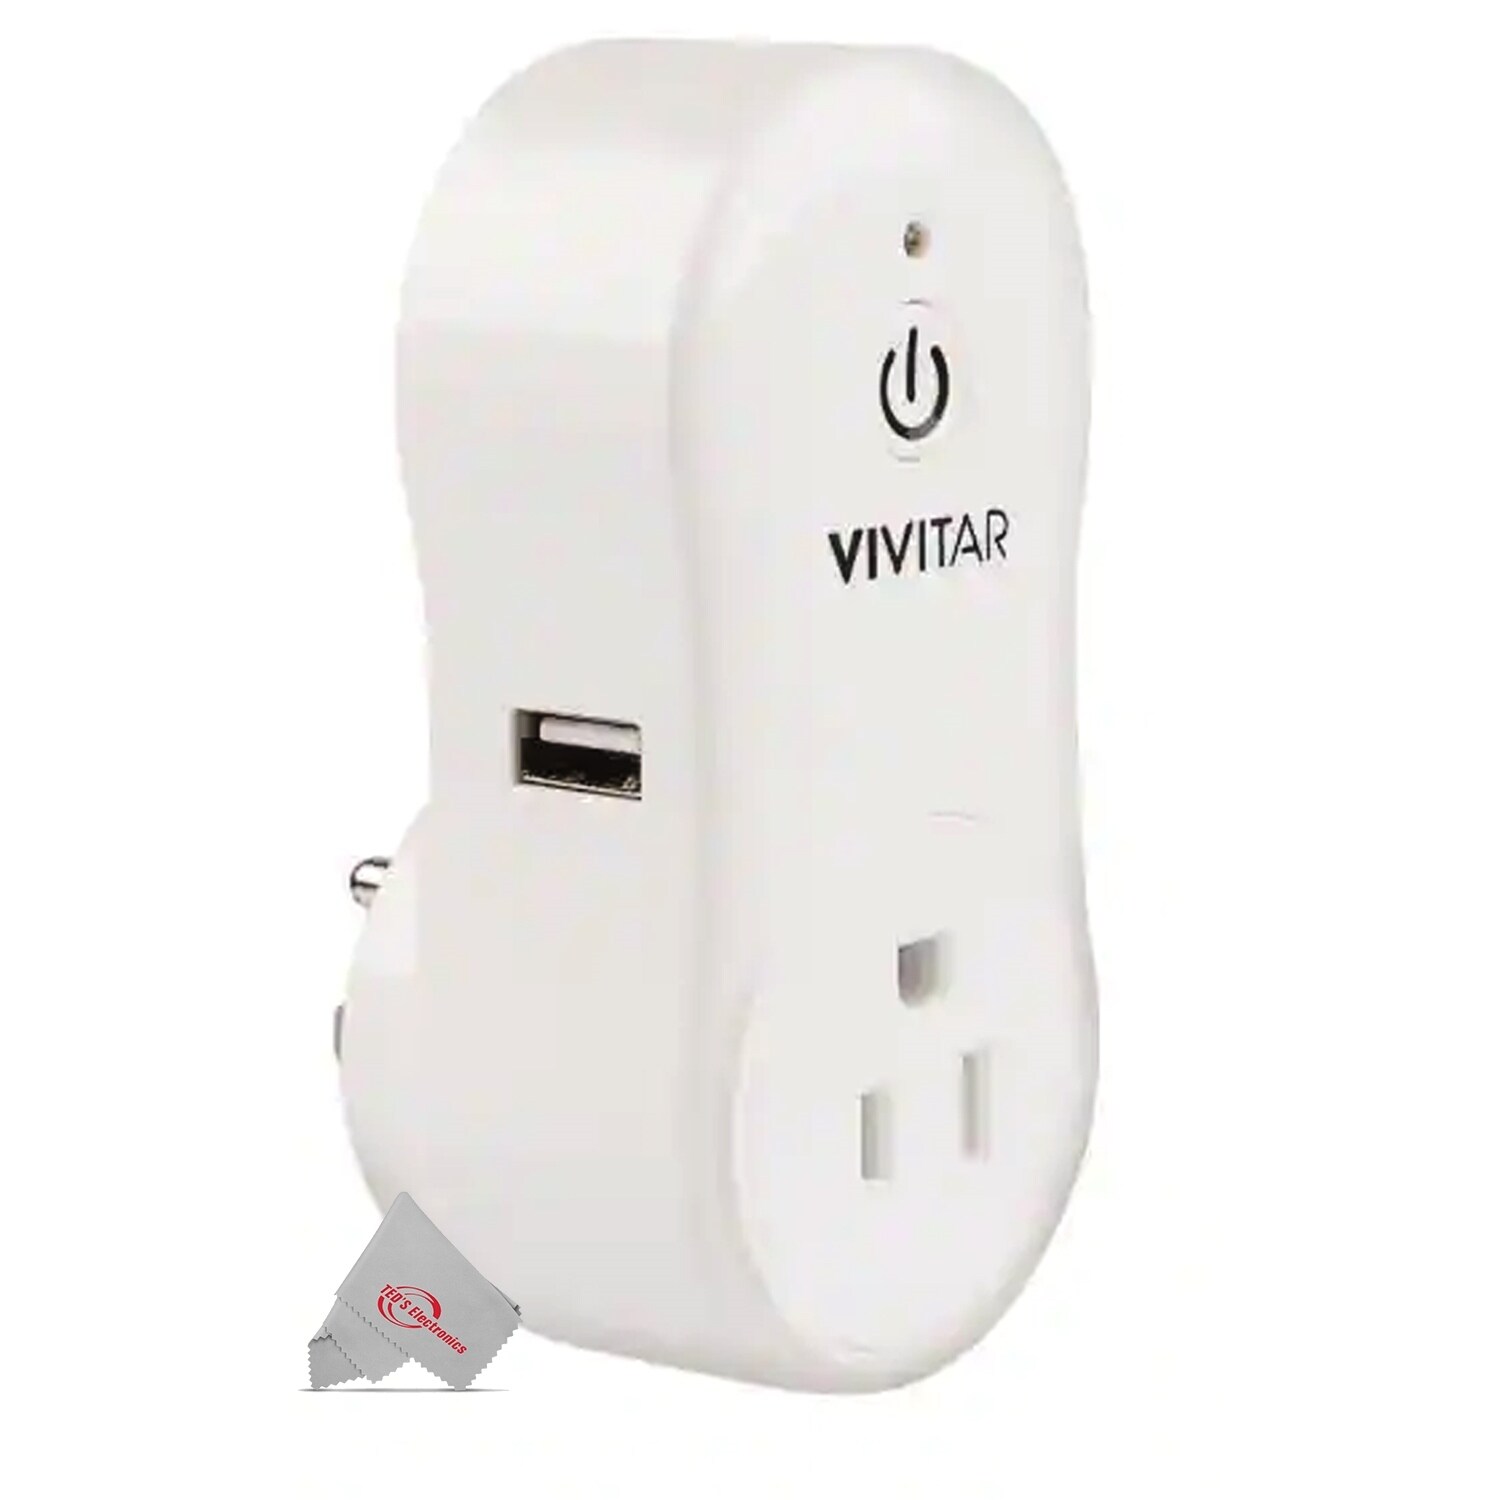 https://ak1.ostkcdn.com/images/products/is/images/direct/4270f5182092a7eab05786bf59698e659be9bb01/2x-Vivitar-Smart-Home-Wi-Fi-Outlet-%2B-USB-Port-Compatible-with-Alexa-and-Google-Home---No-Hub-Required.jpg